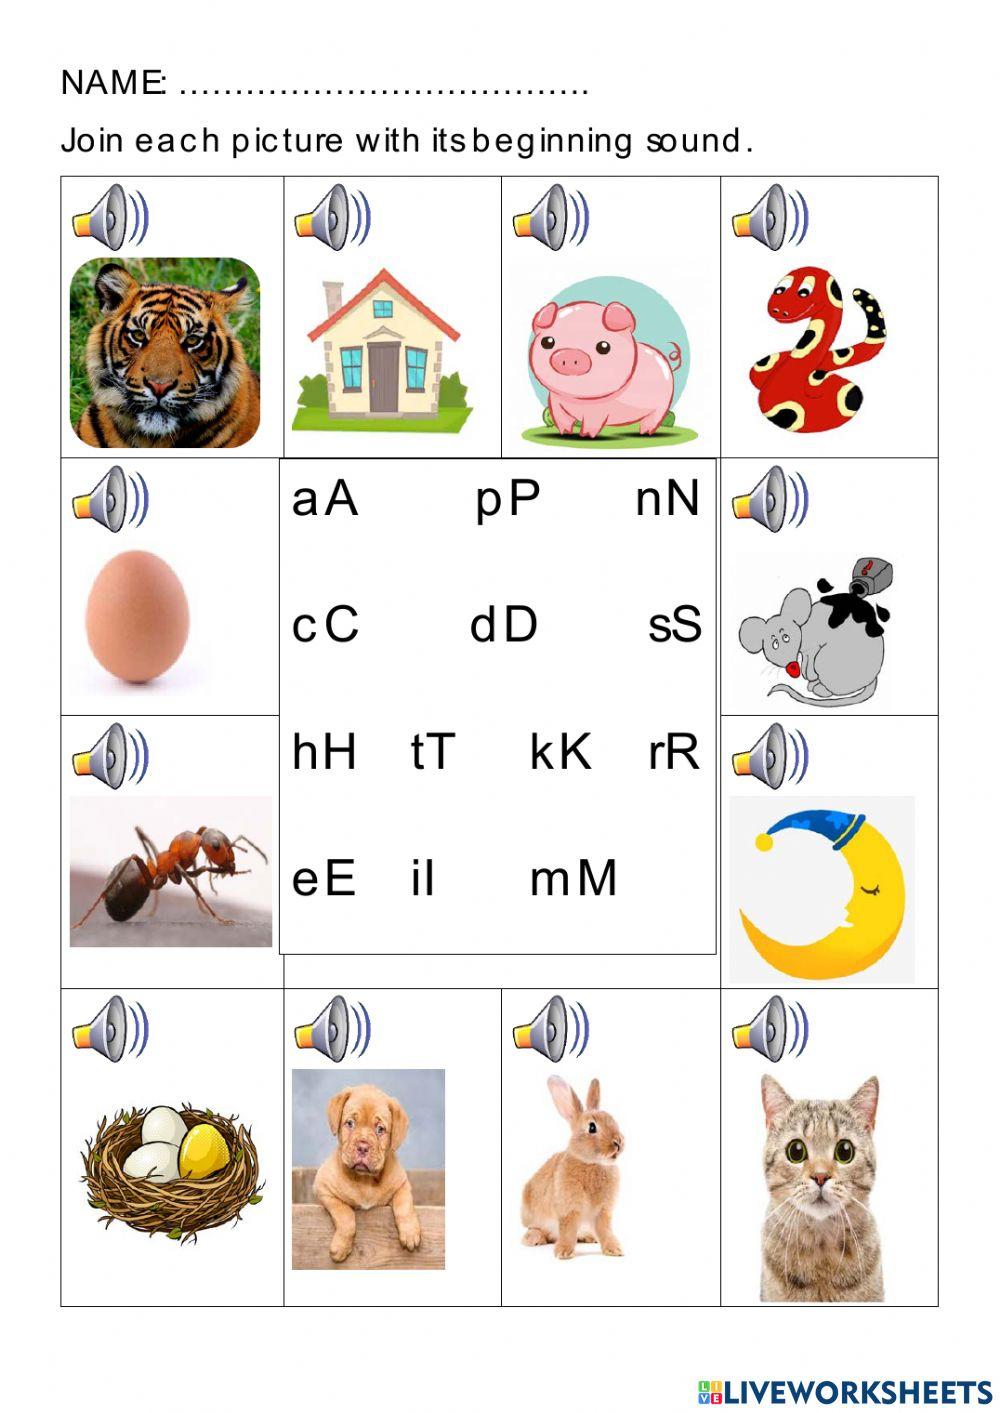 Initial Sounds. Phonics. Groups1 and 2